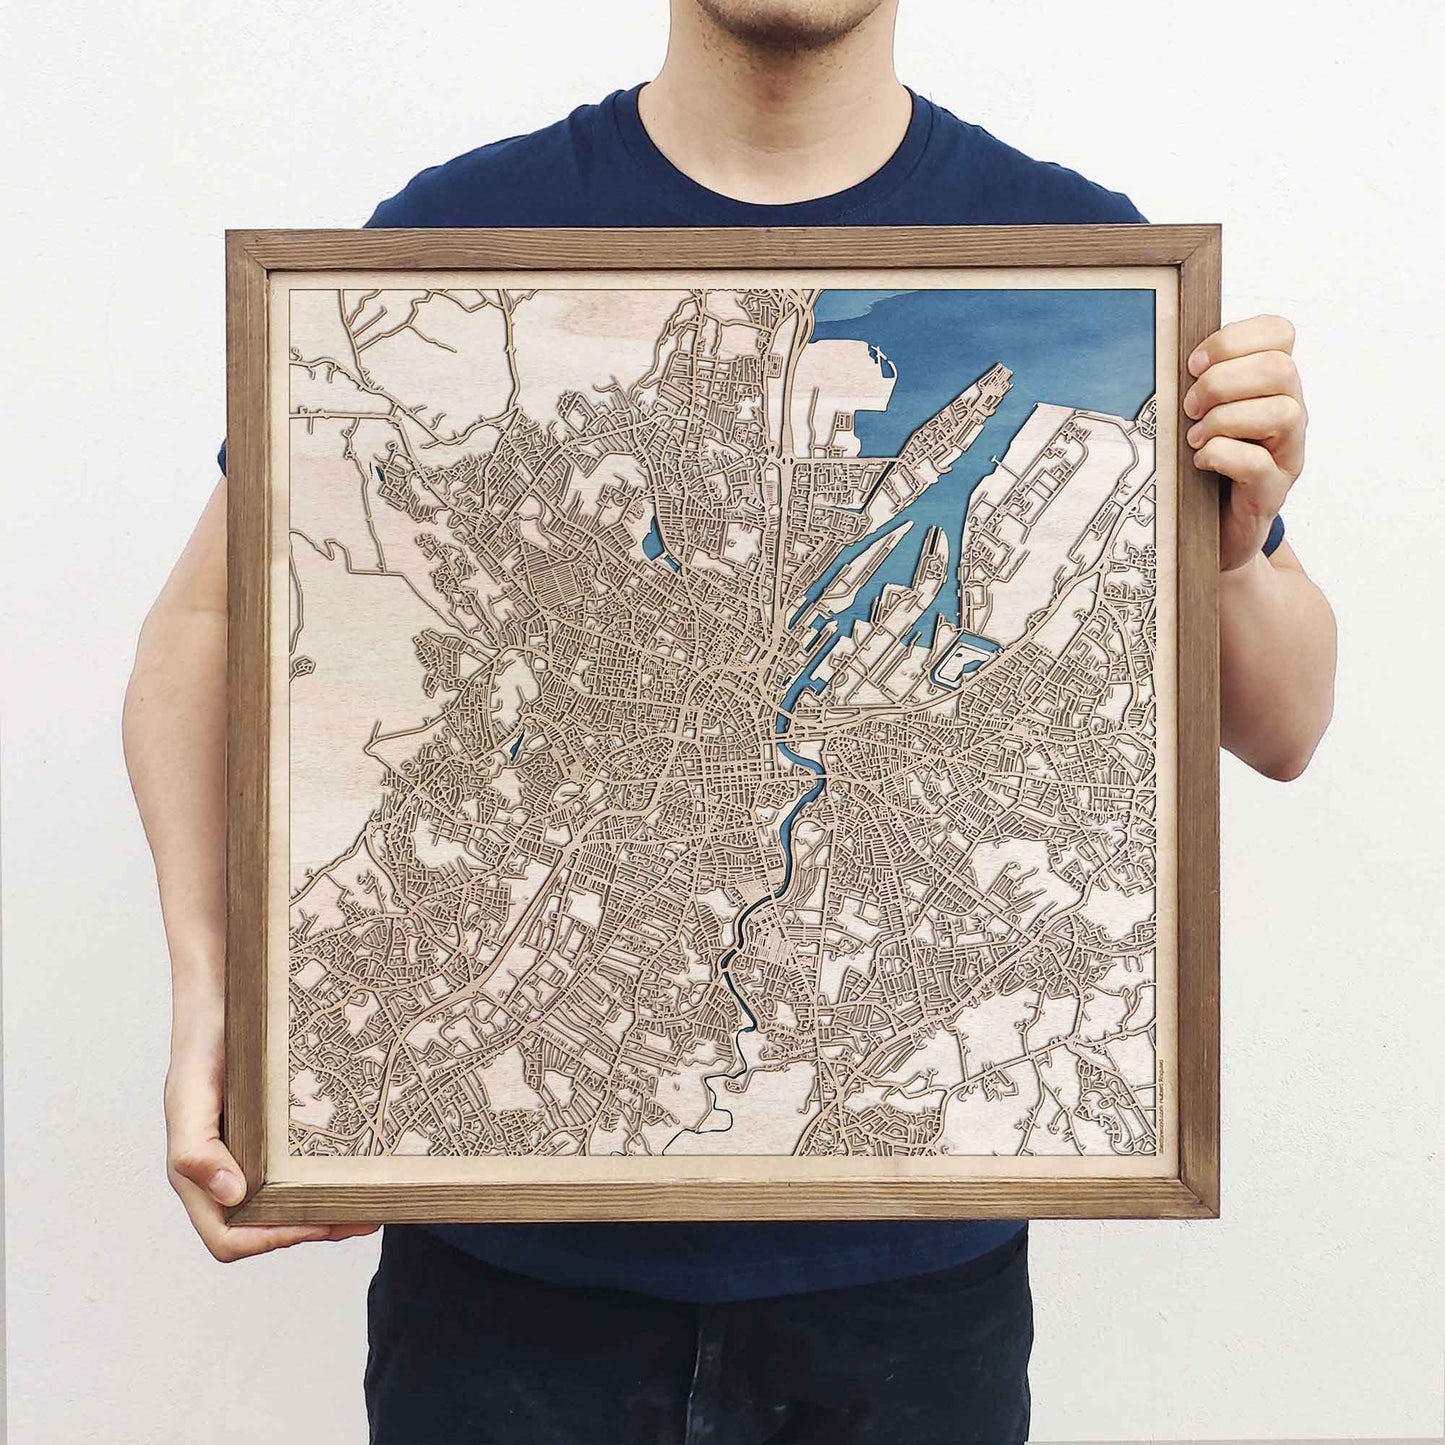 Belfast Wooden Map by CityWood - Custom Wood Map Art - Unique Laser Cut Engraved - Anniversary Gift